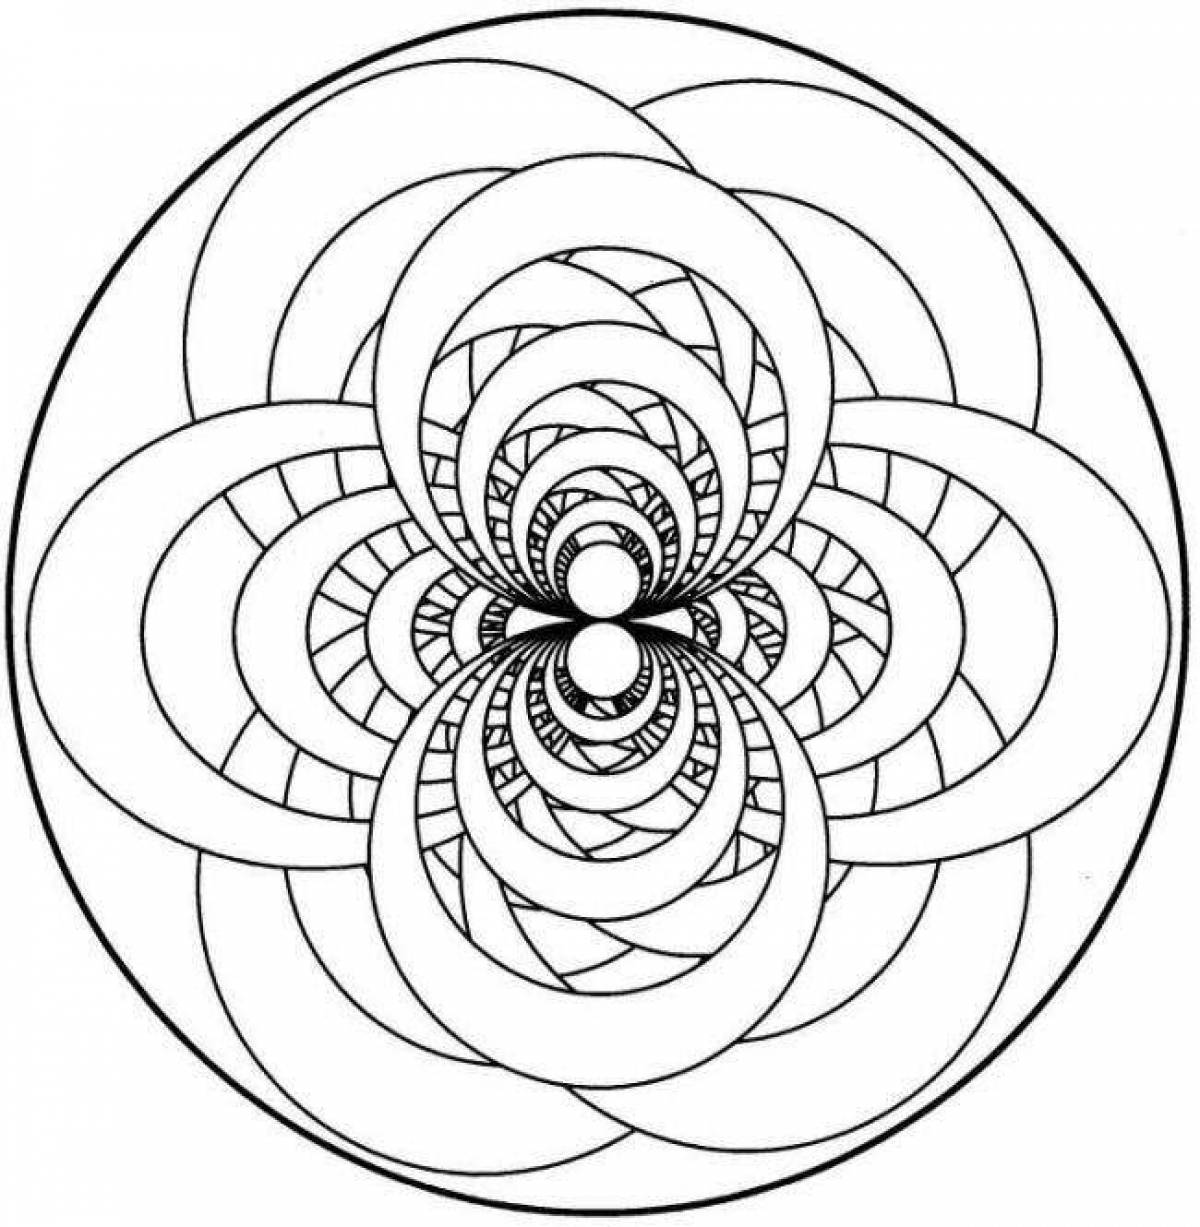 Creative coloring spiral unpainted